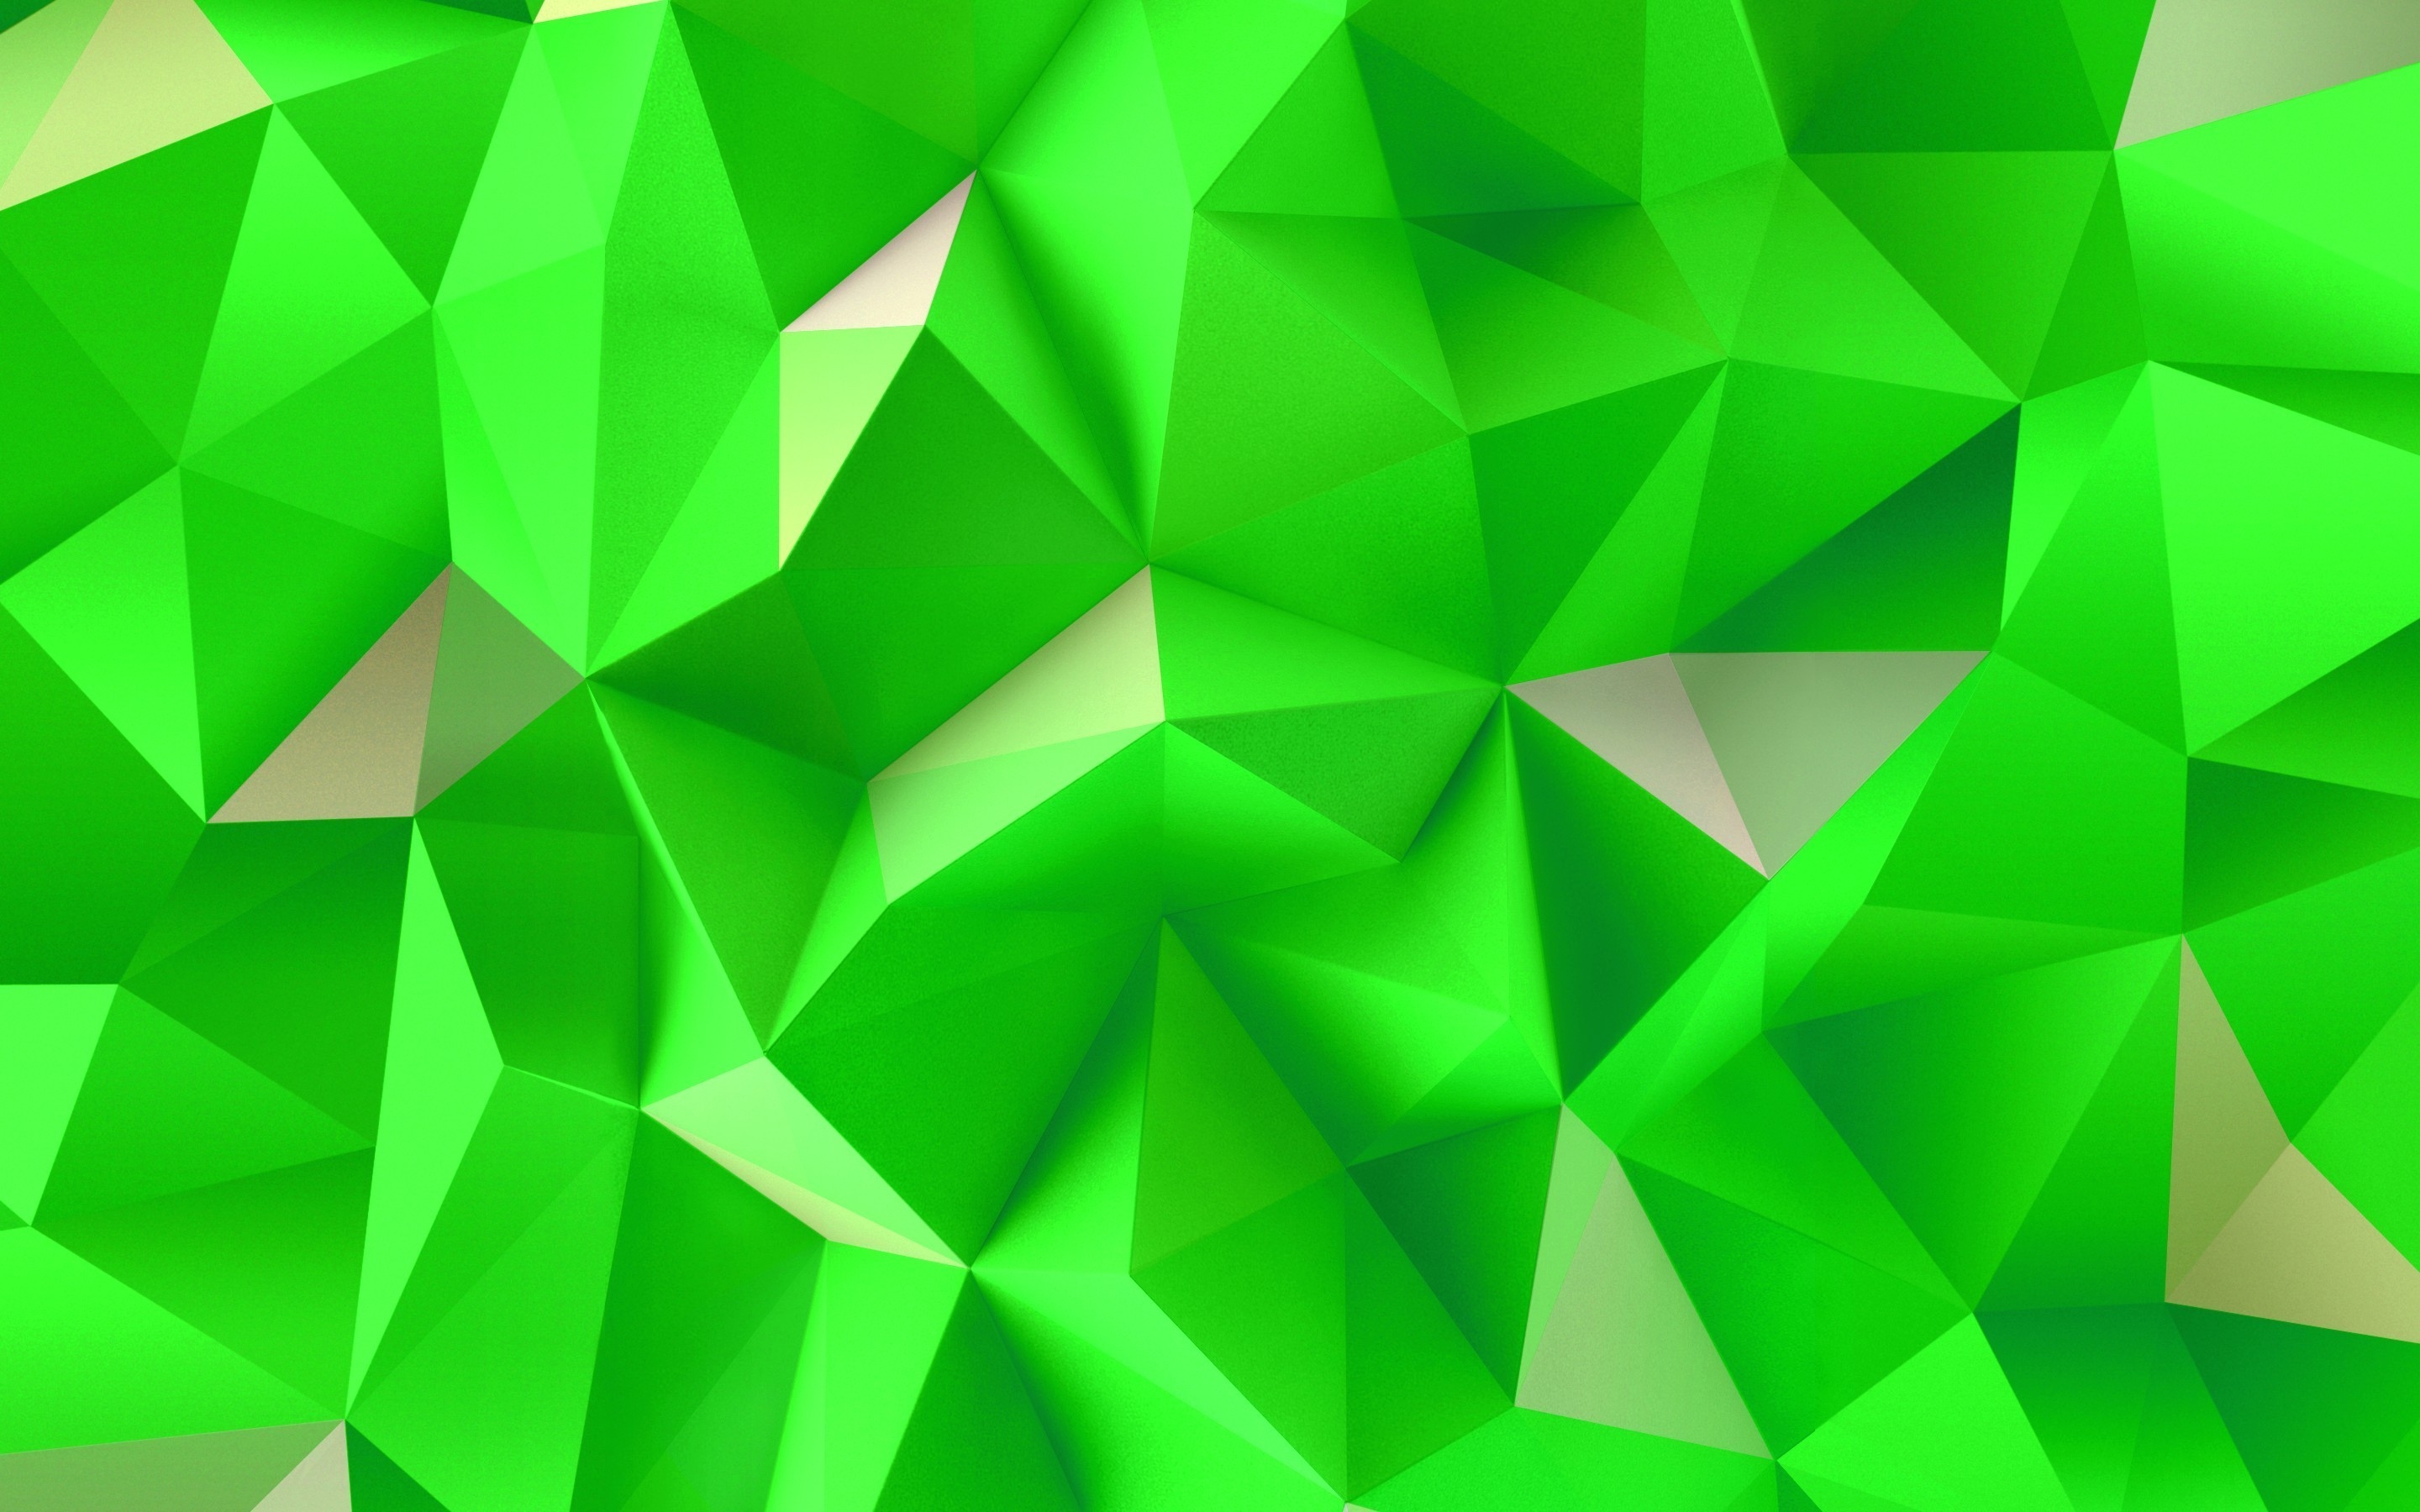 Green Triangles for 2880 x 1800 Retina Display resolution